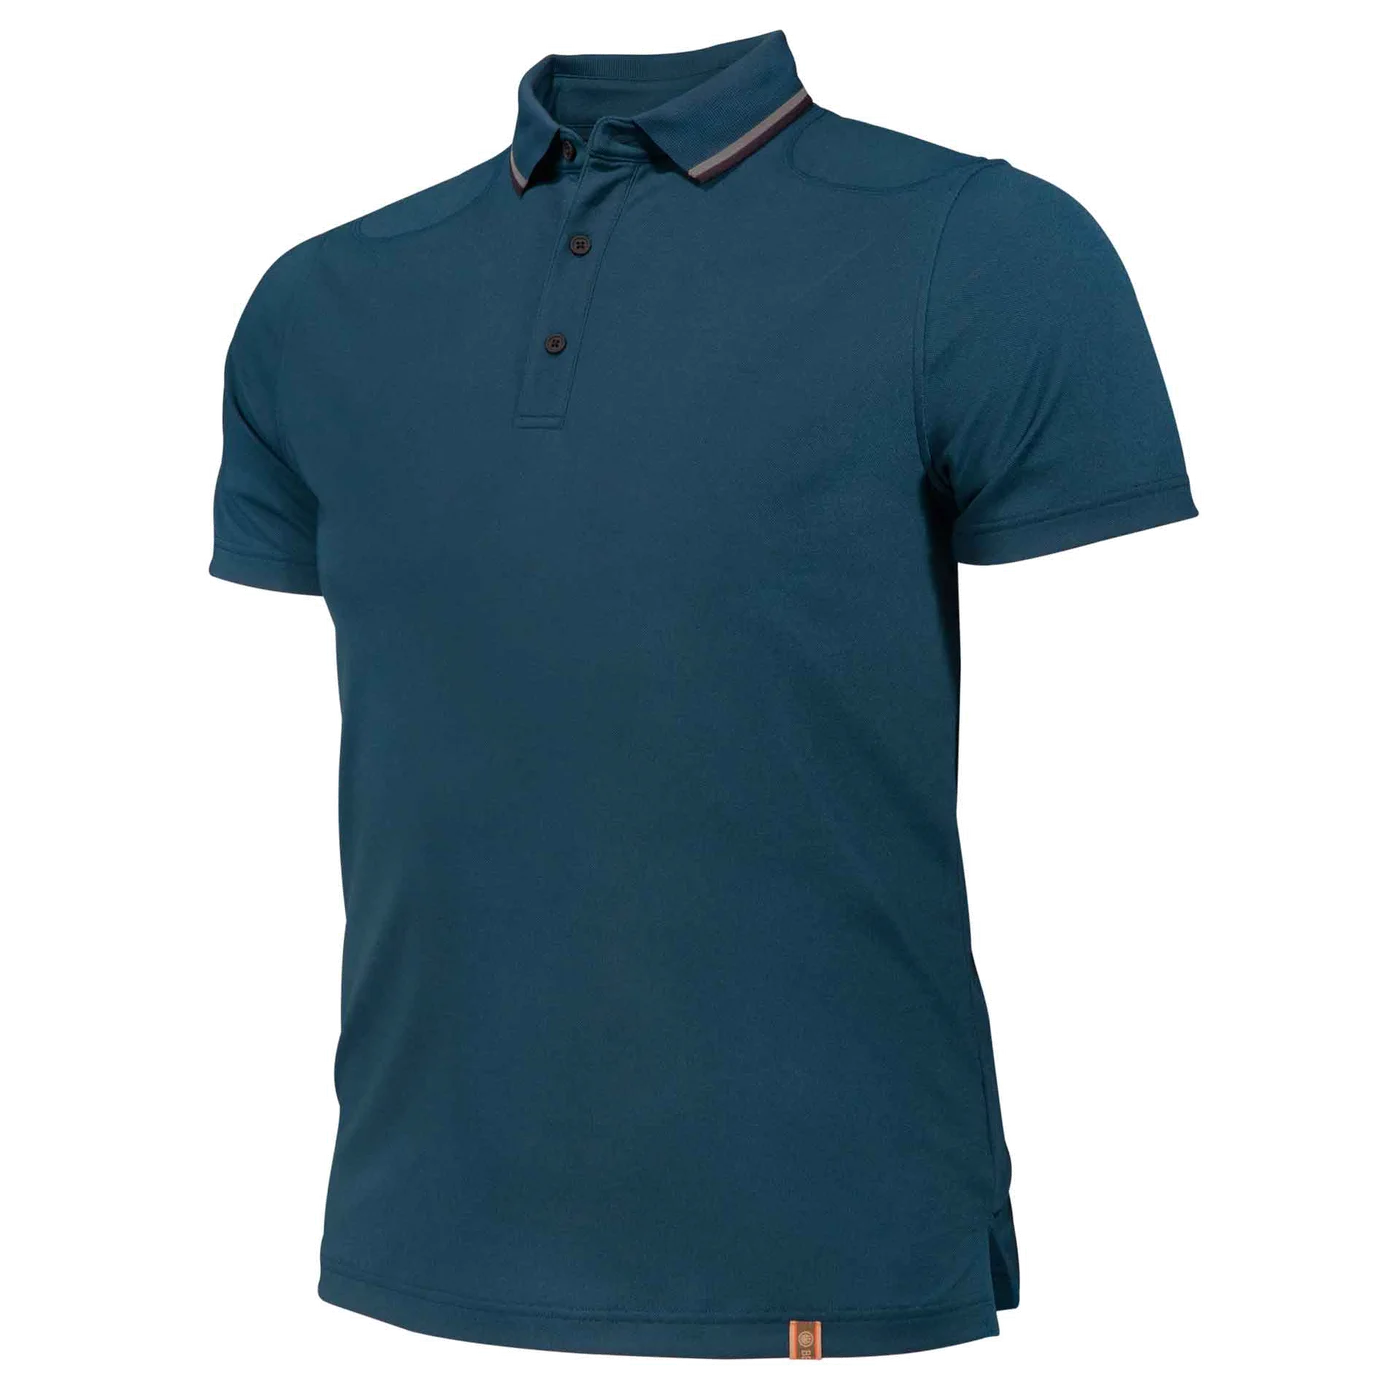 MP421T181305A3_ChillPolo_Navy_FRONT_SQUARE